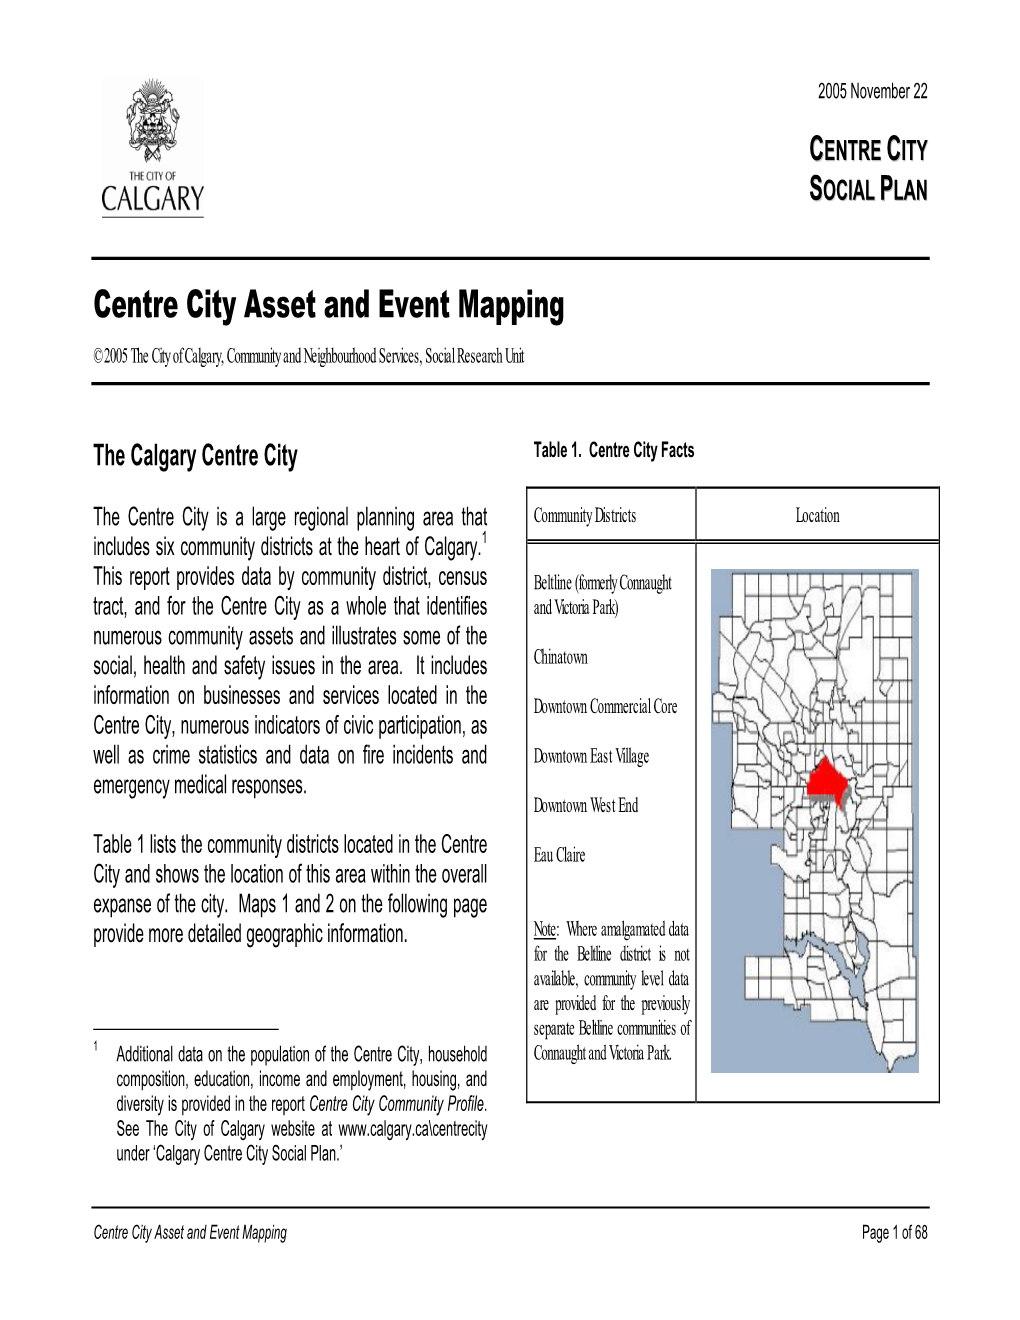 Centre City Asset and Event Mapping © 2005 the City of Calgary, Community and Neighbourhood Services, Social Research Unit